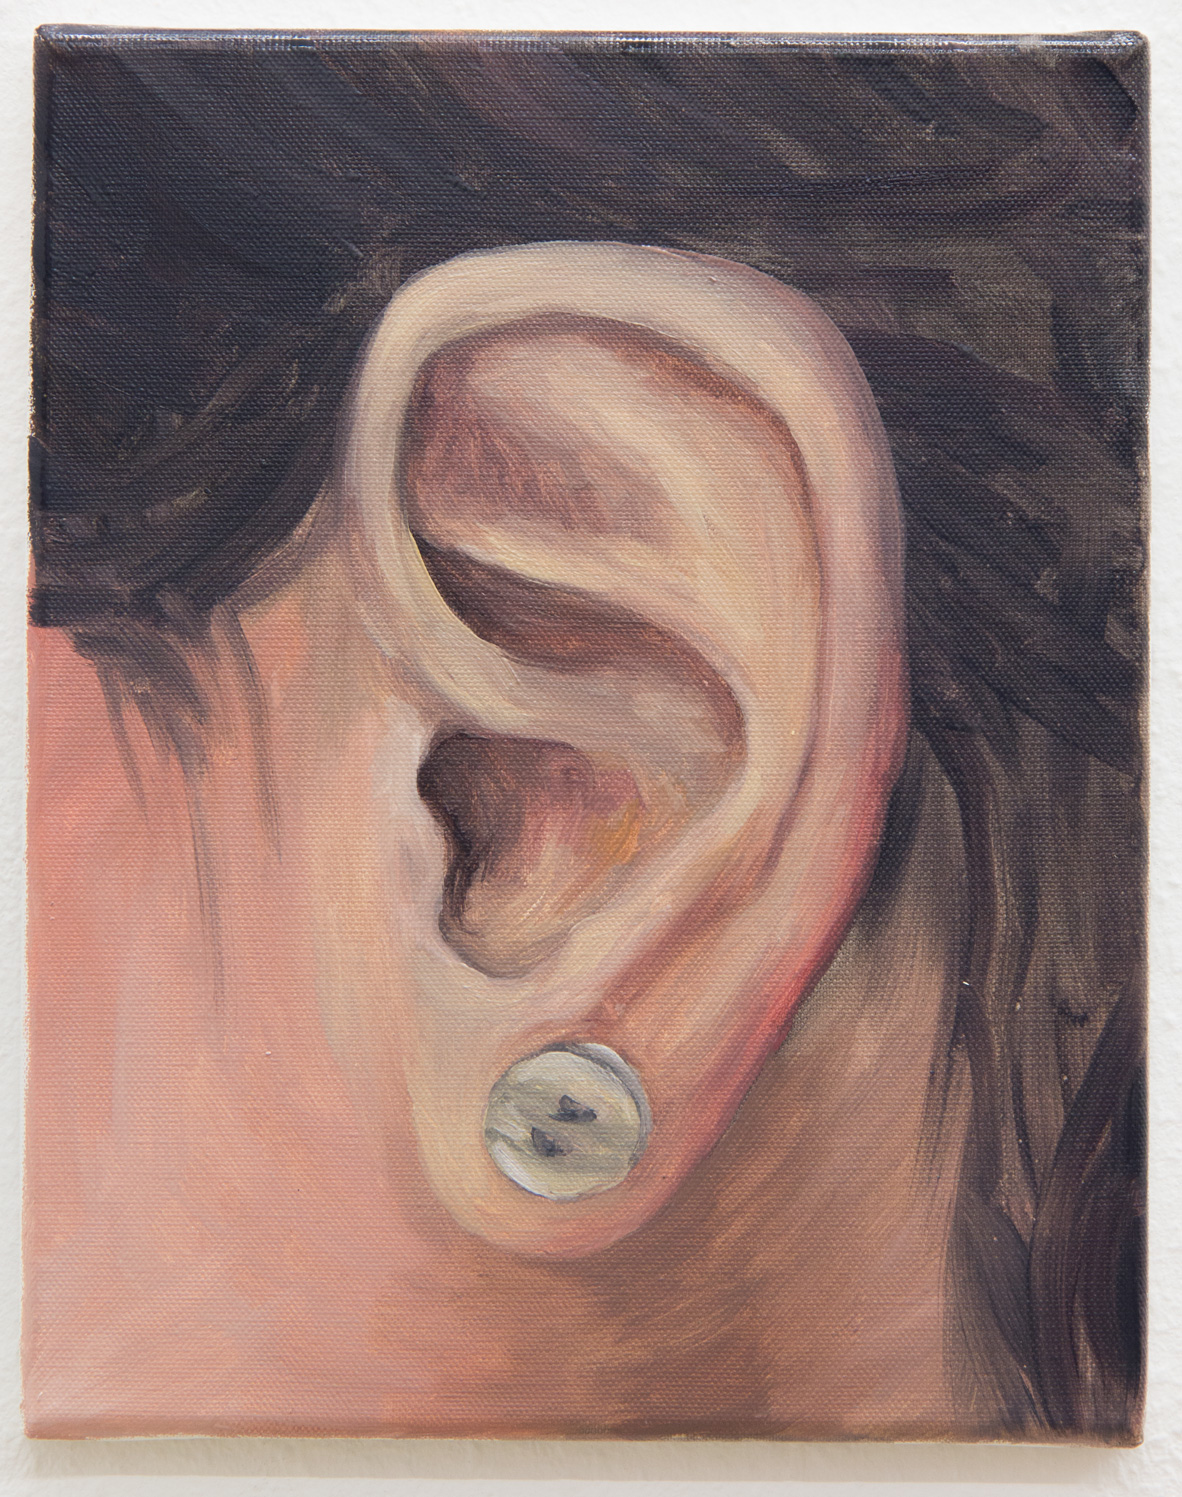 From the "Ear Collection"; 24 x 30 cm; oil on canvas; 2017